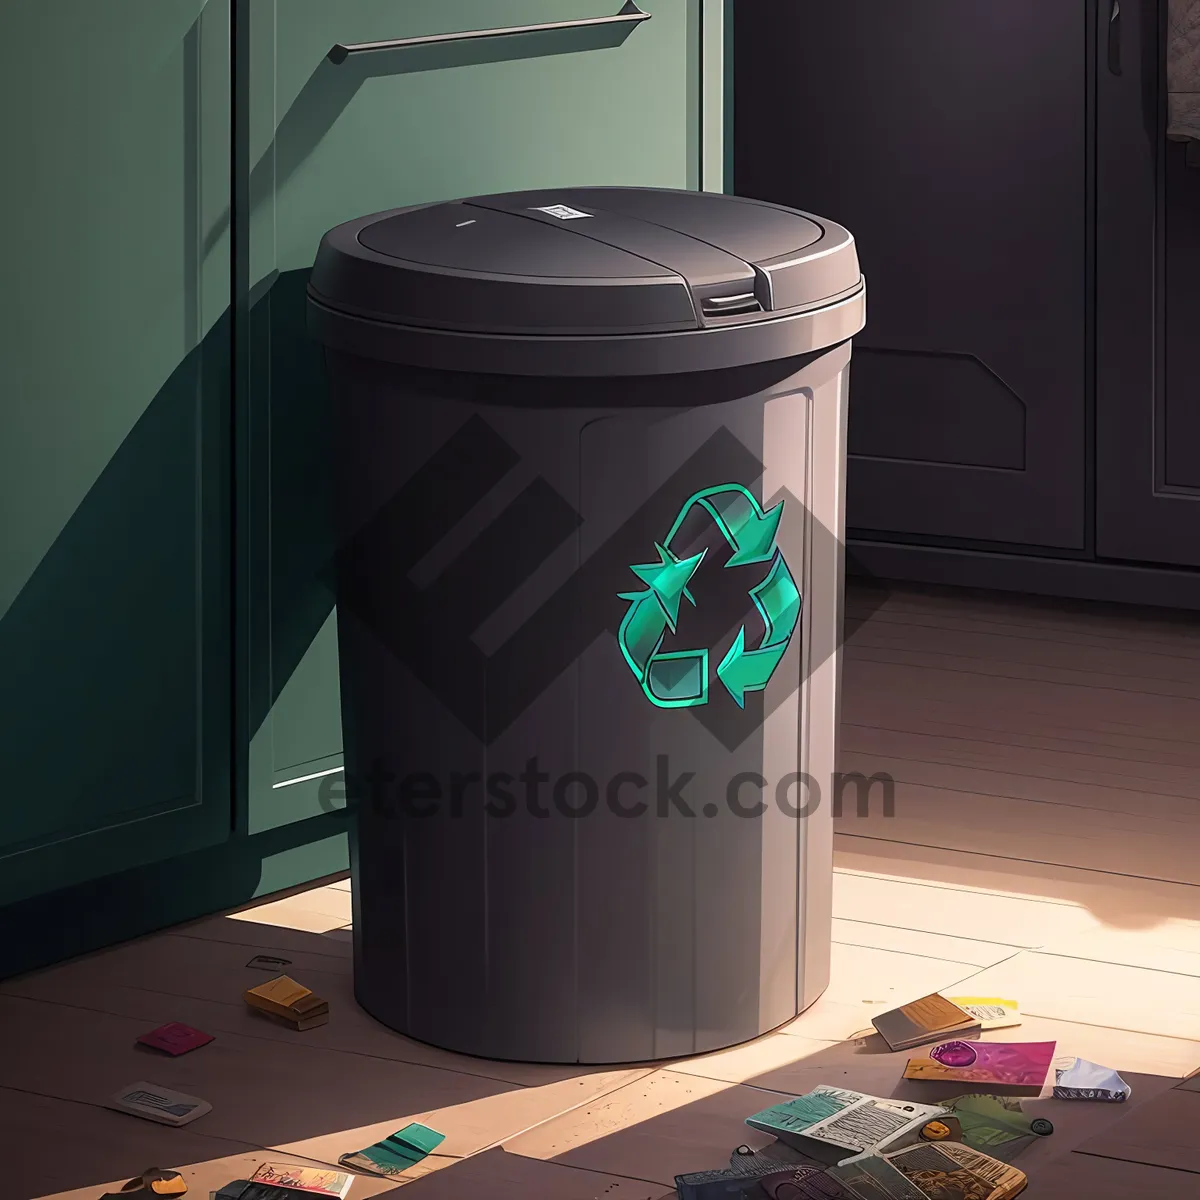 Picture of Metal Ashcan Bin and Shredder Device